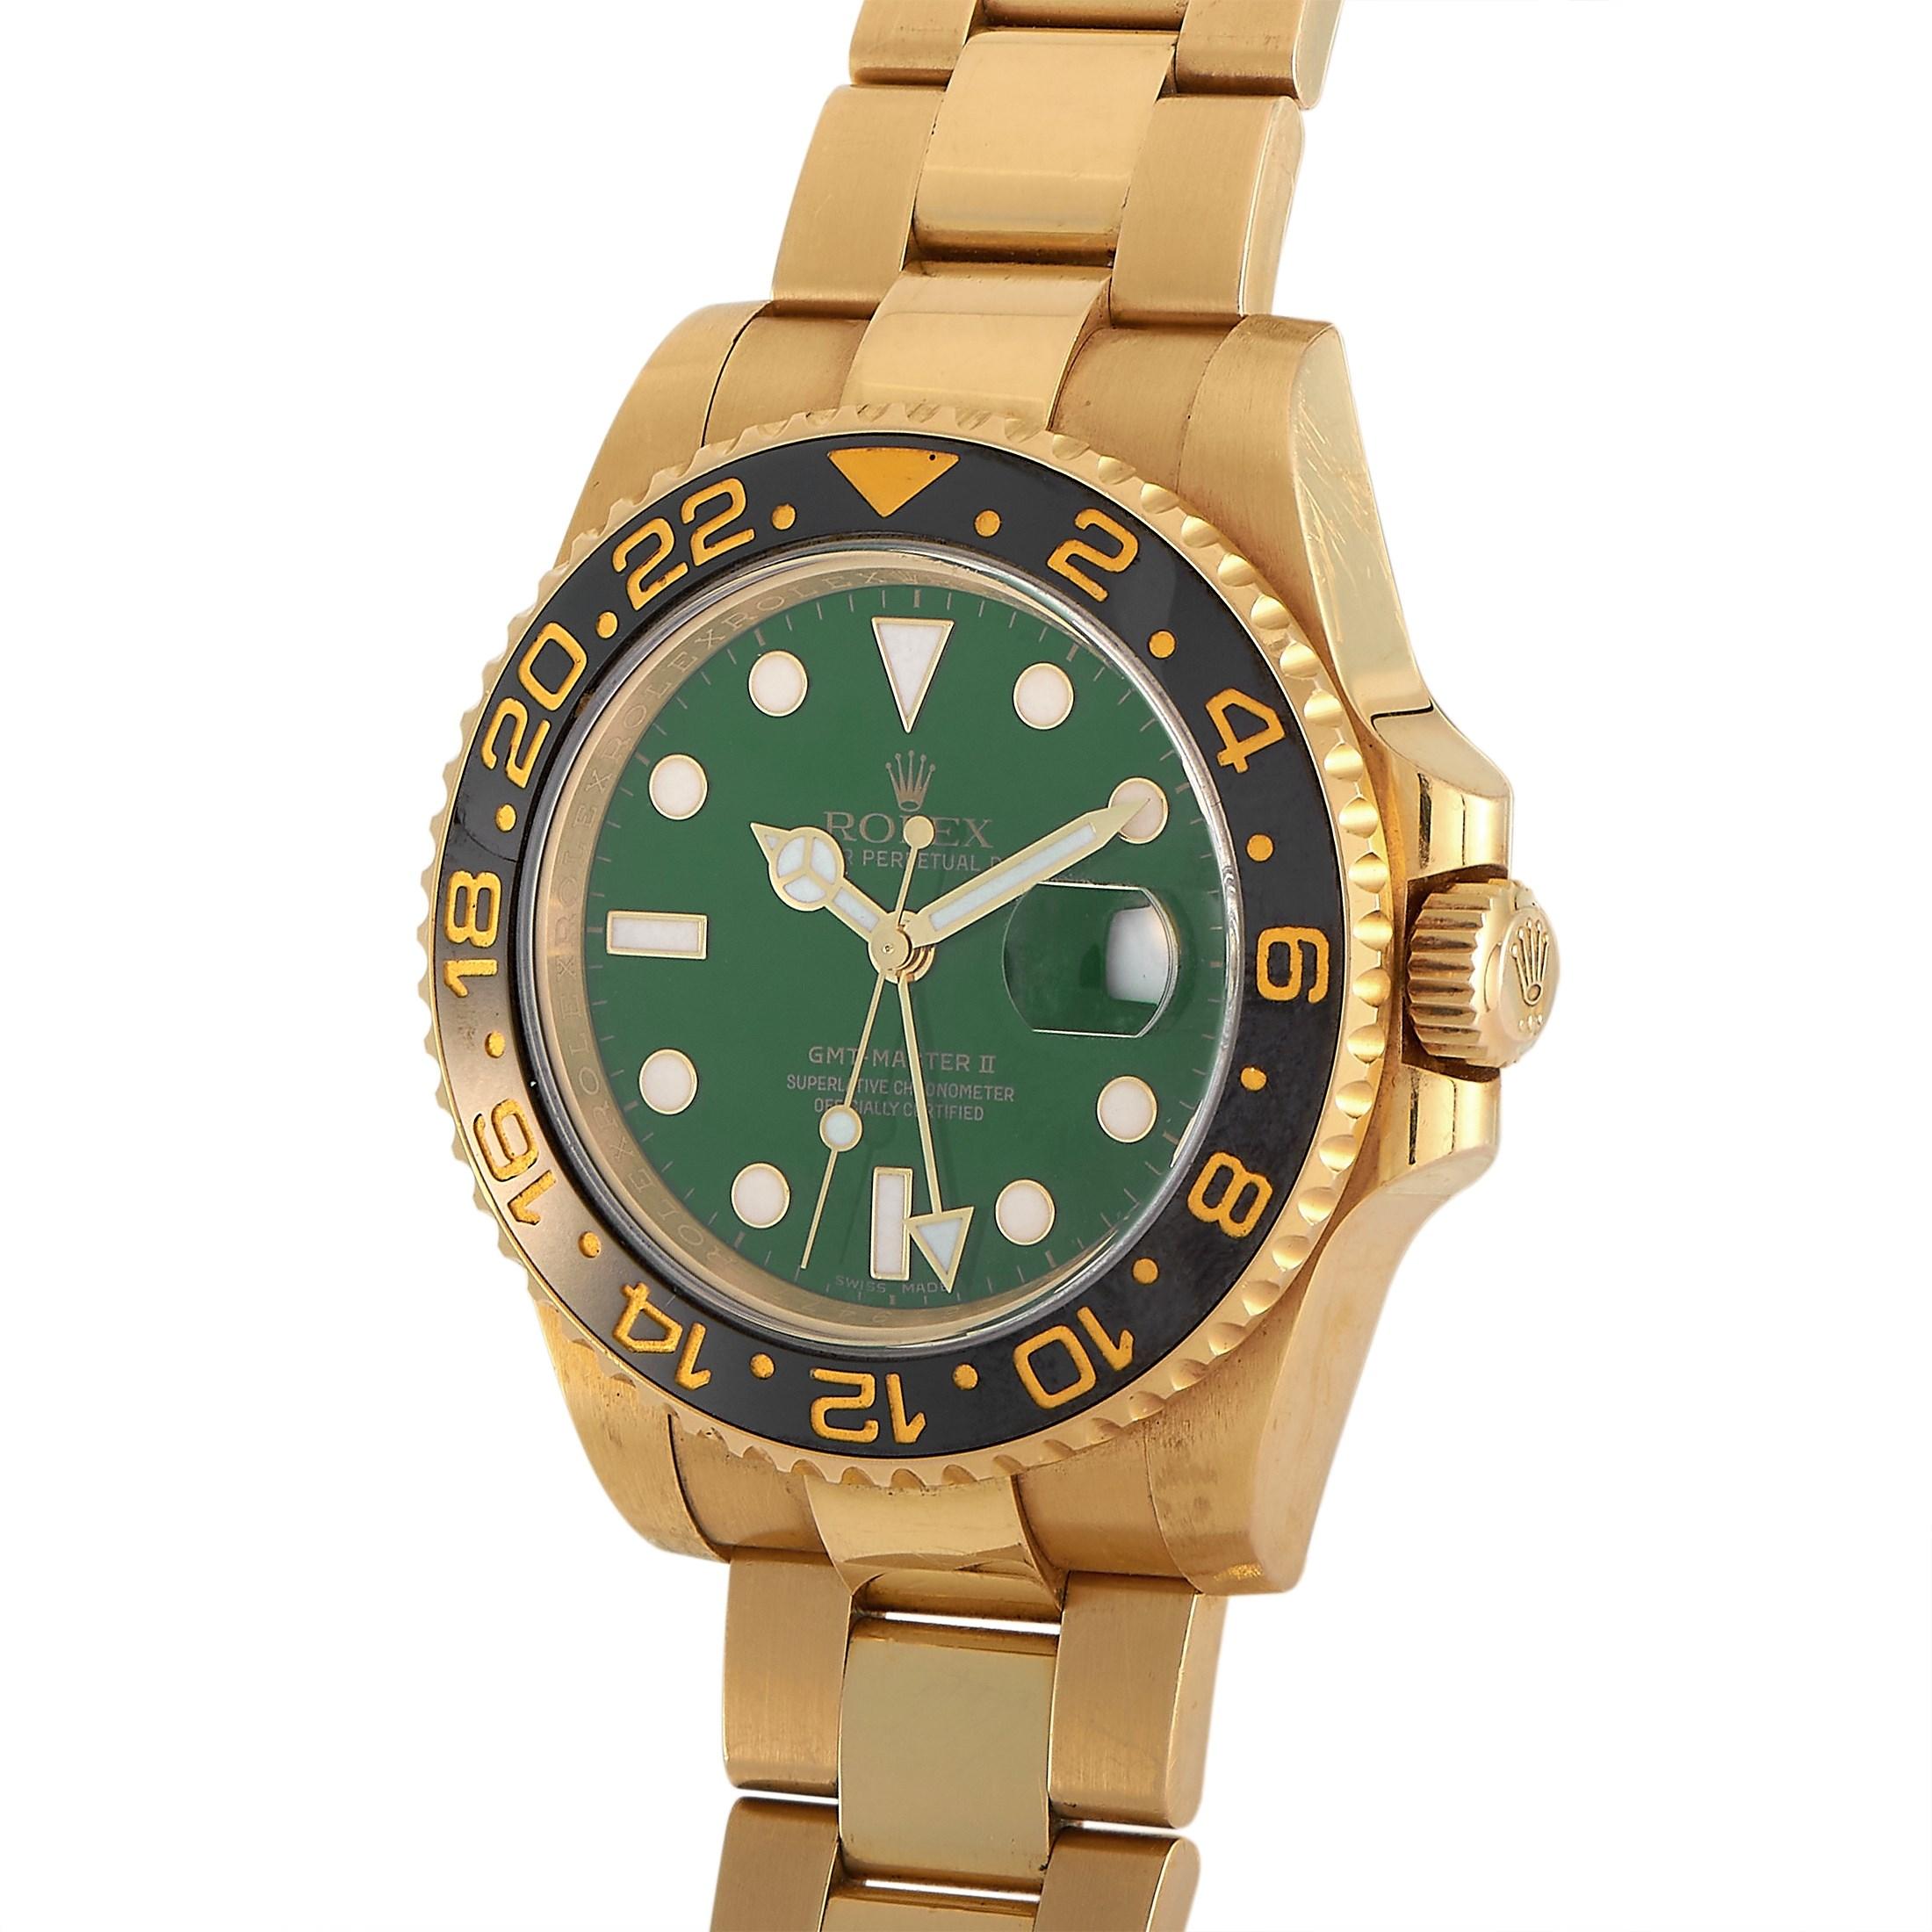 First introduced in 2005 during Rolex's 50th anniversary celebration, the Rolex GMT-Master II 18K Yellow Gold 50th Anniversary Green Dial Watch 116718 displays a striking and stunning green 